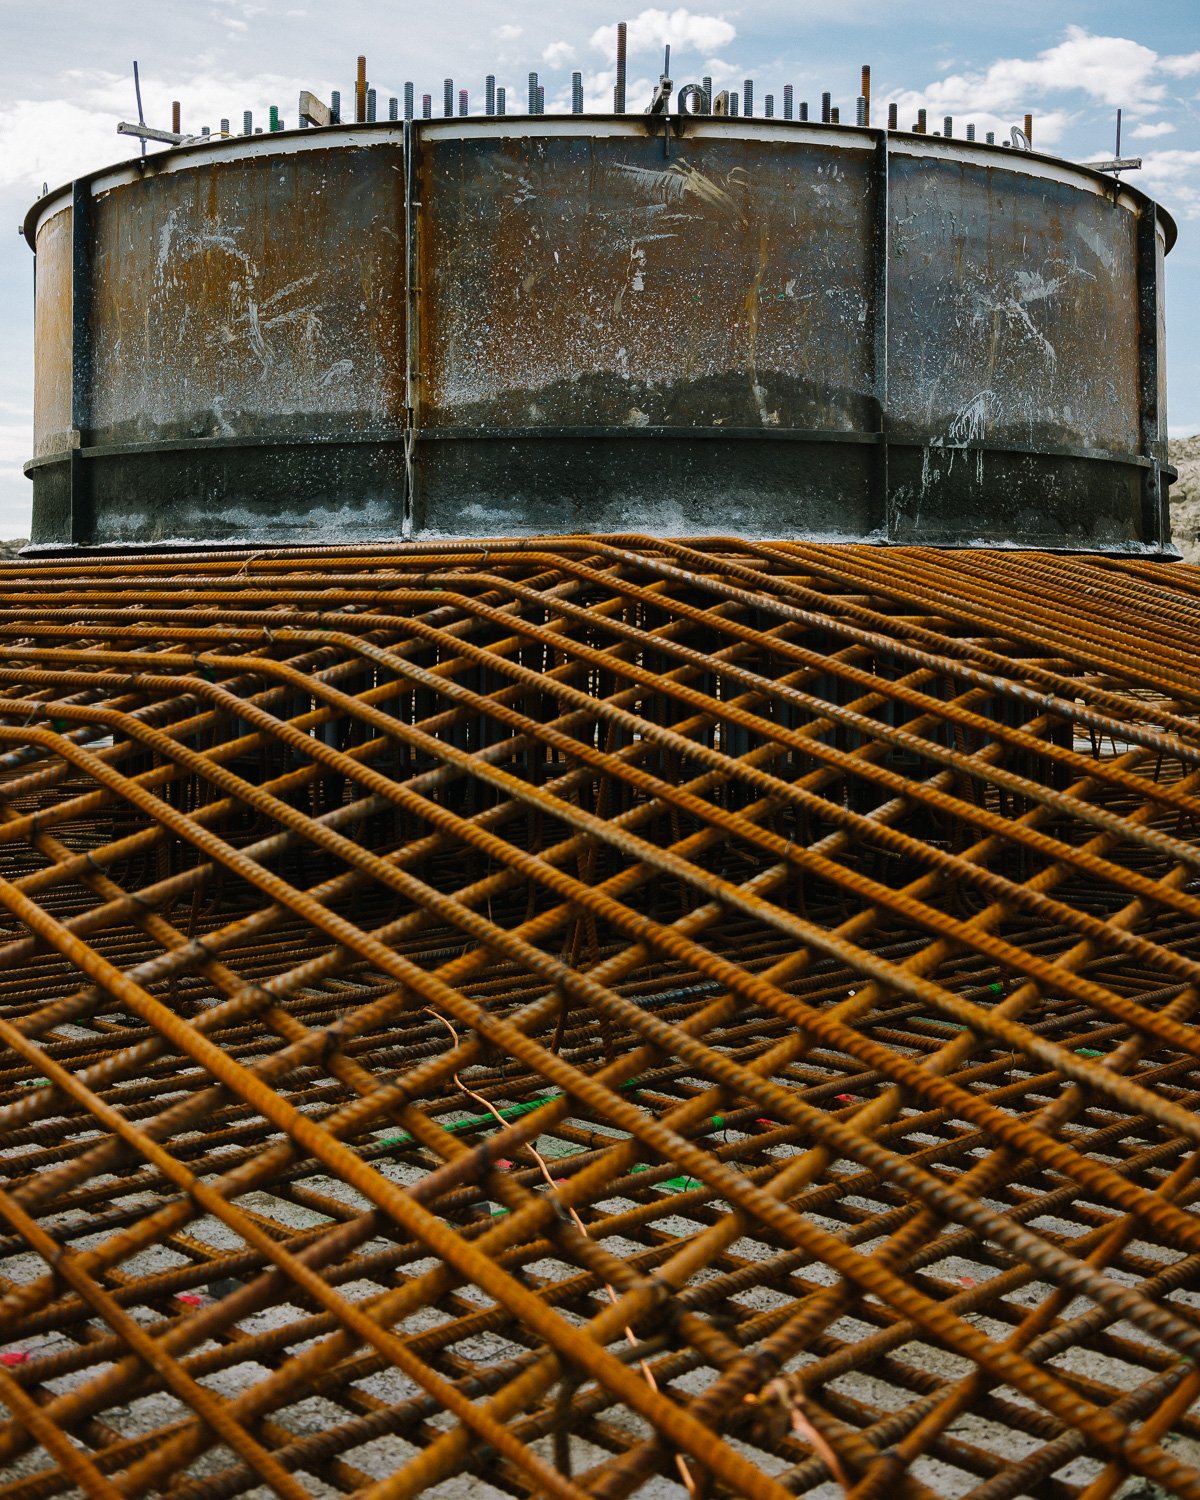  The base of a new wind turbine at the Milligan 1 Wind Farm Project, Western, NE, for The New York Times, 2020 